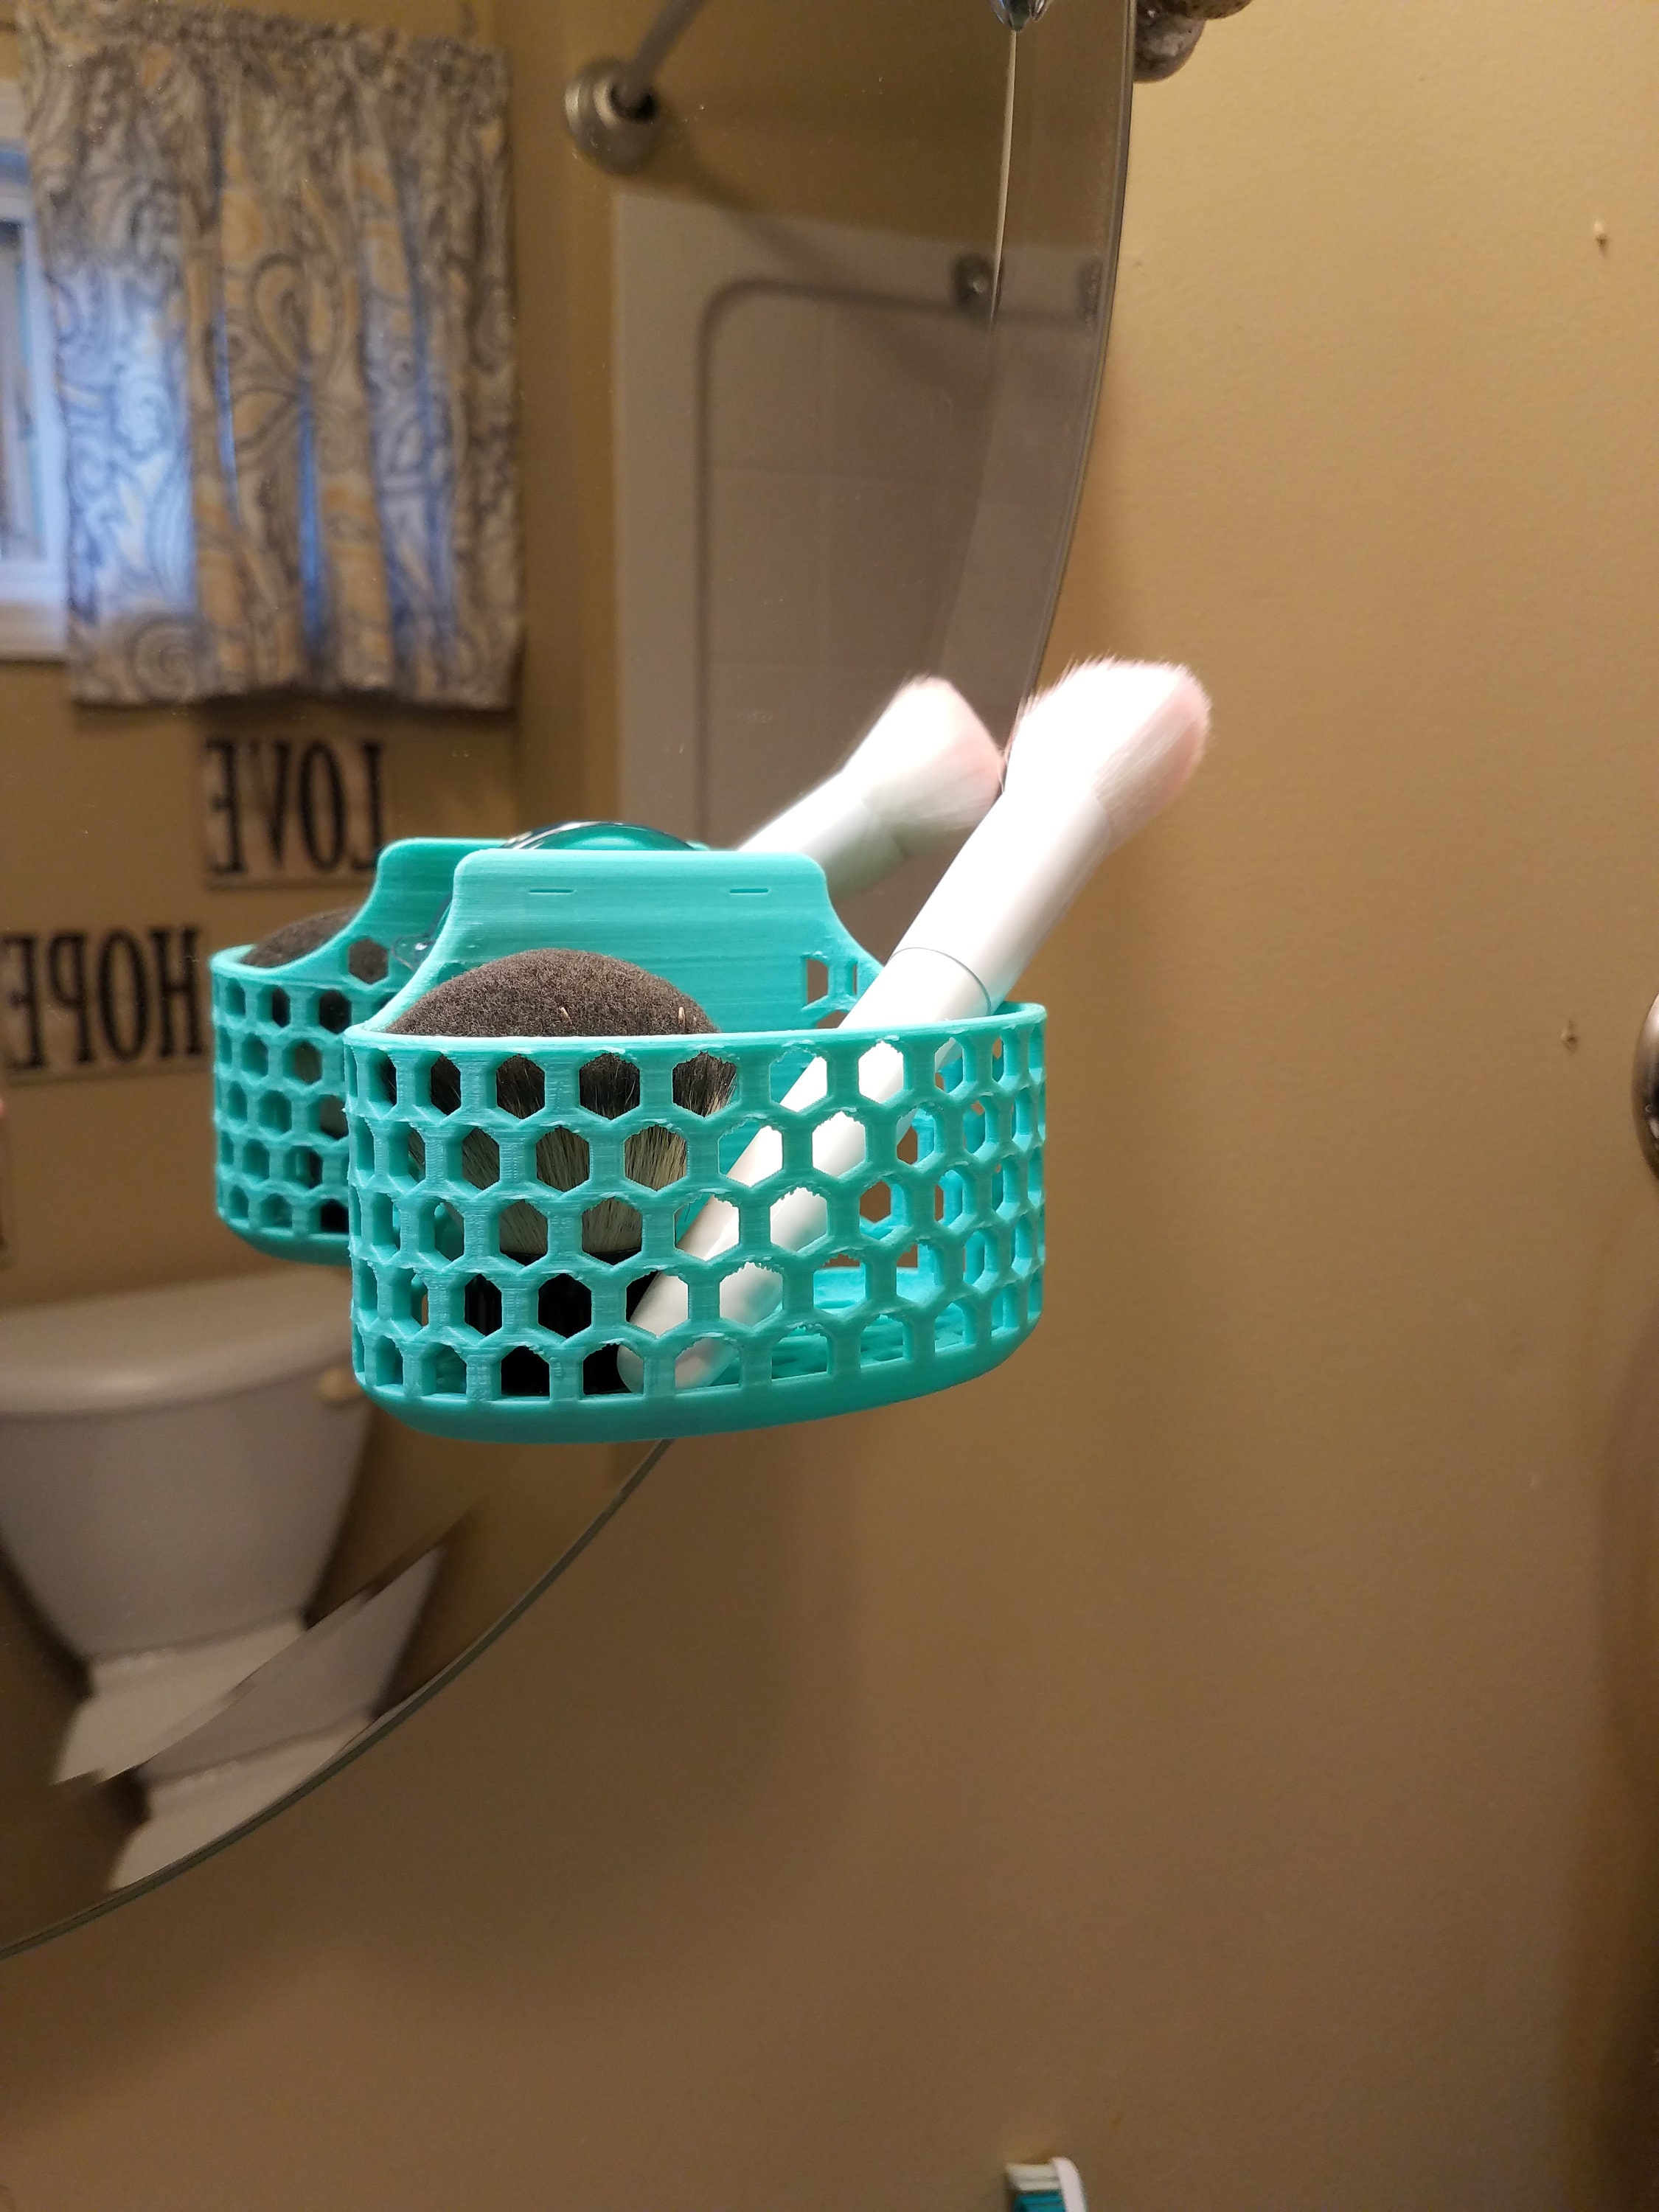 The Big One® Mesh Shower Caddy